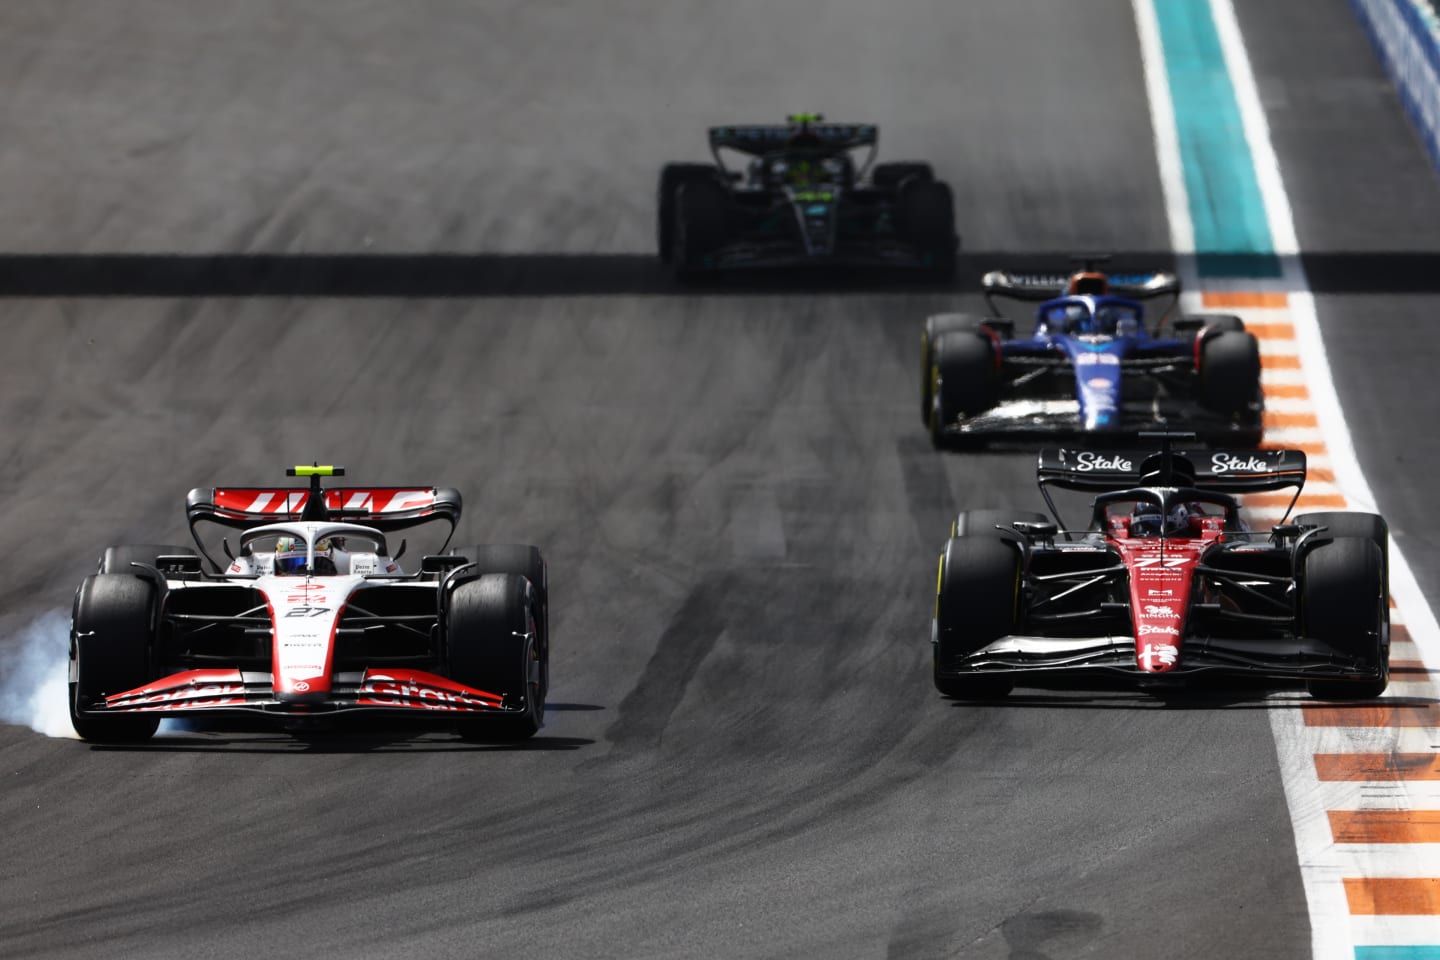 MIAMI, FLORIDA - MAY 07: Nico Hulkenberg of Germany driving the (27) Haas F1 VF-23 Ferrari locks a wheel under braking as he overtakes Valtteri Bottas of Finland driving the (77) Alfa Romeo F1 C43 Ferrari during the F1 Grand Prix of Miami at Miami International Autodrome on May 07, 2023 in Miami, Florida. (Photo by Mark Thompson/Getty Images)